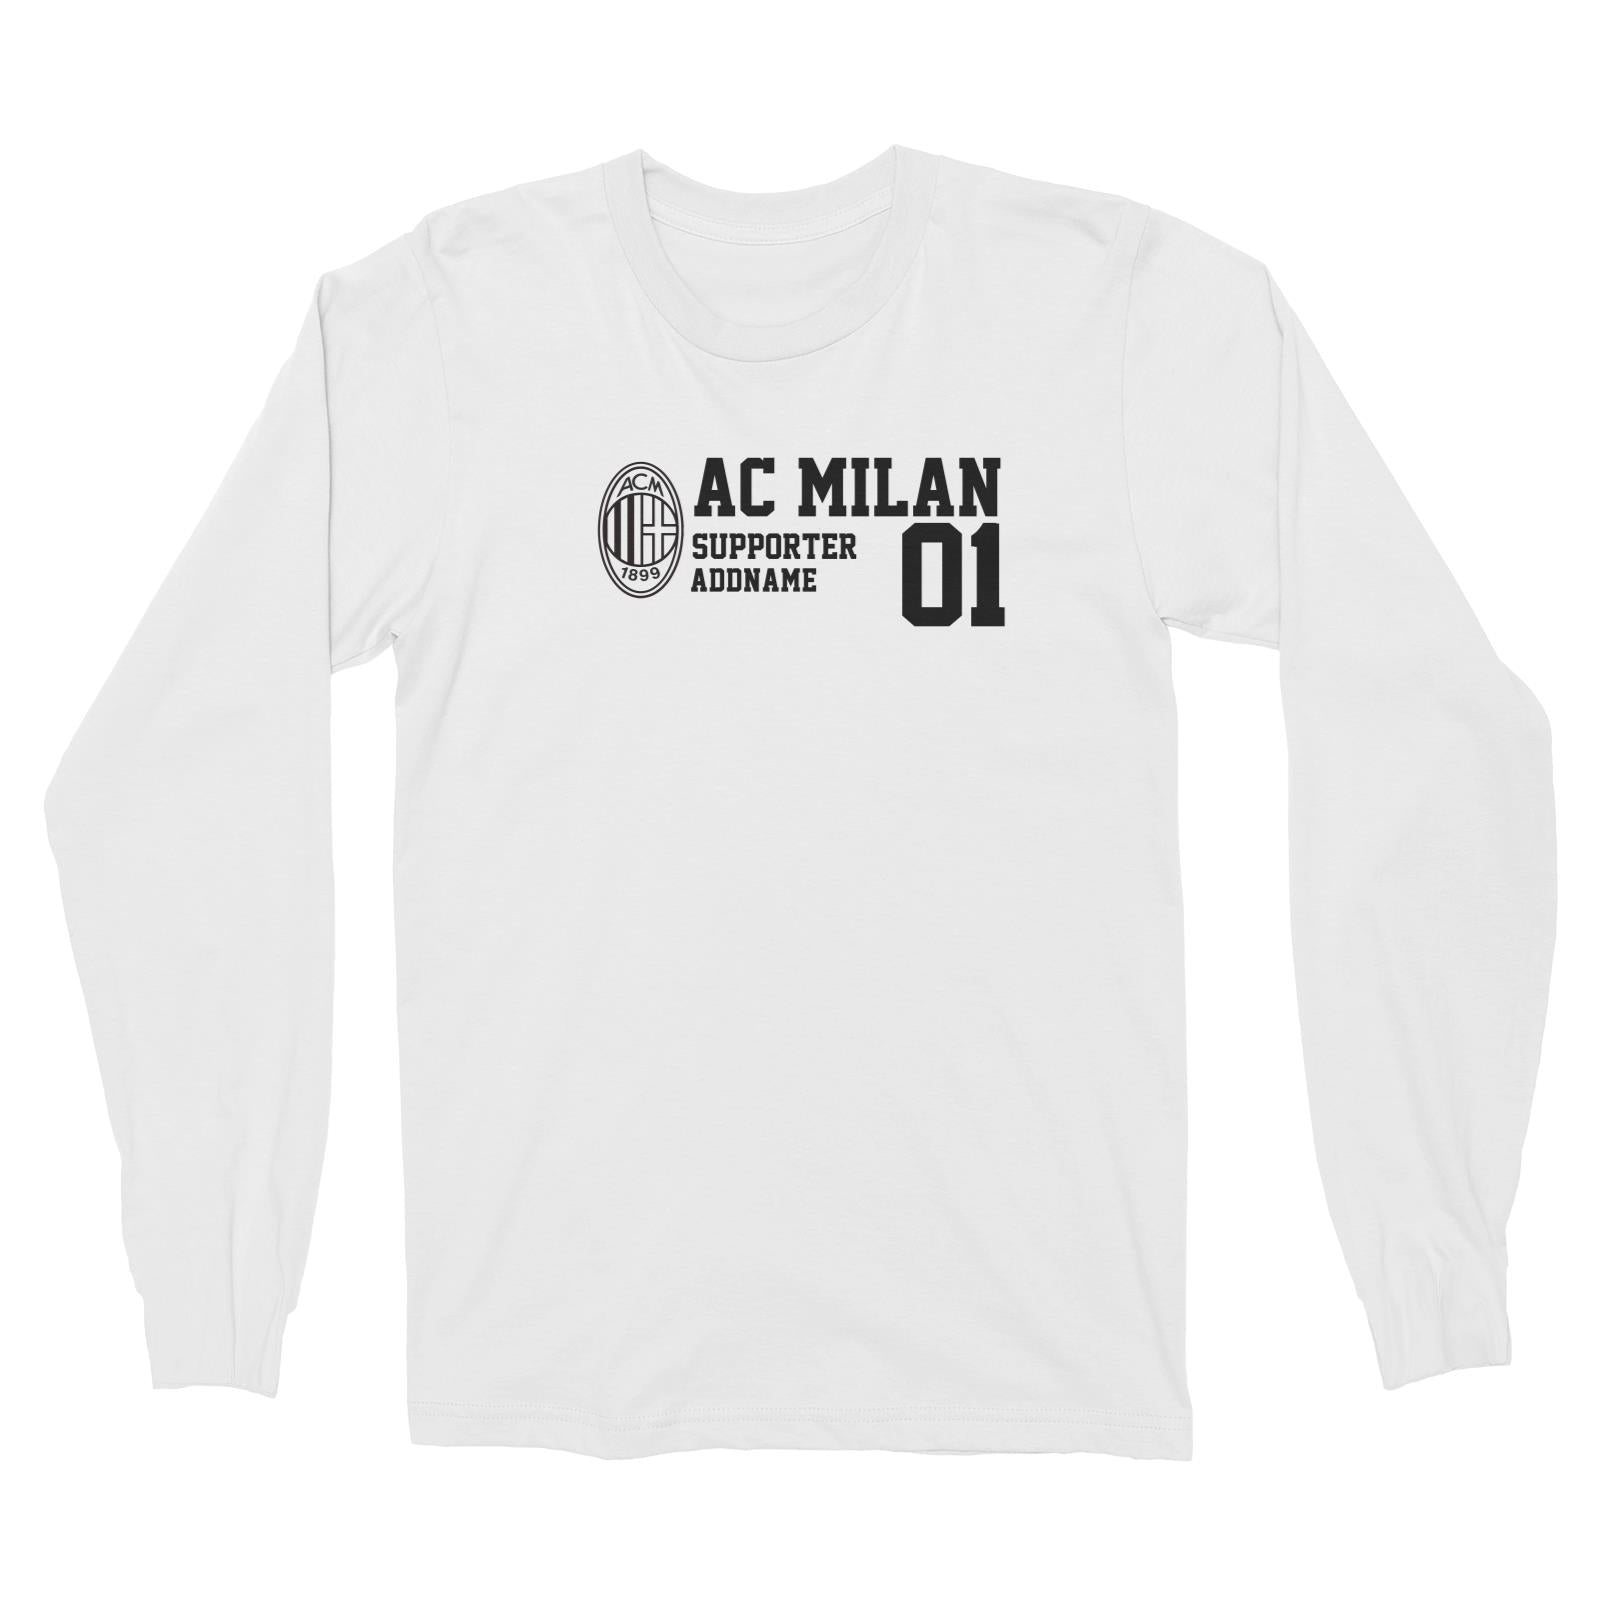 AC Milan Football Supporter Addname Long Sleeve Unisex T-Shirt